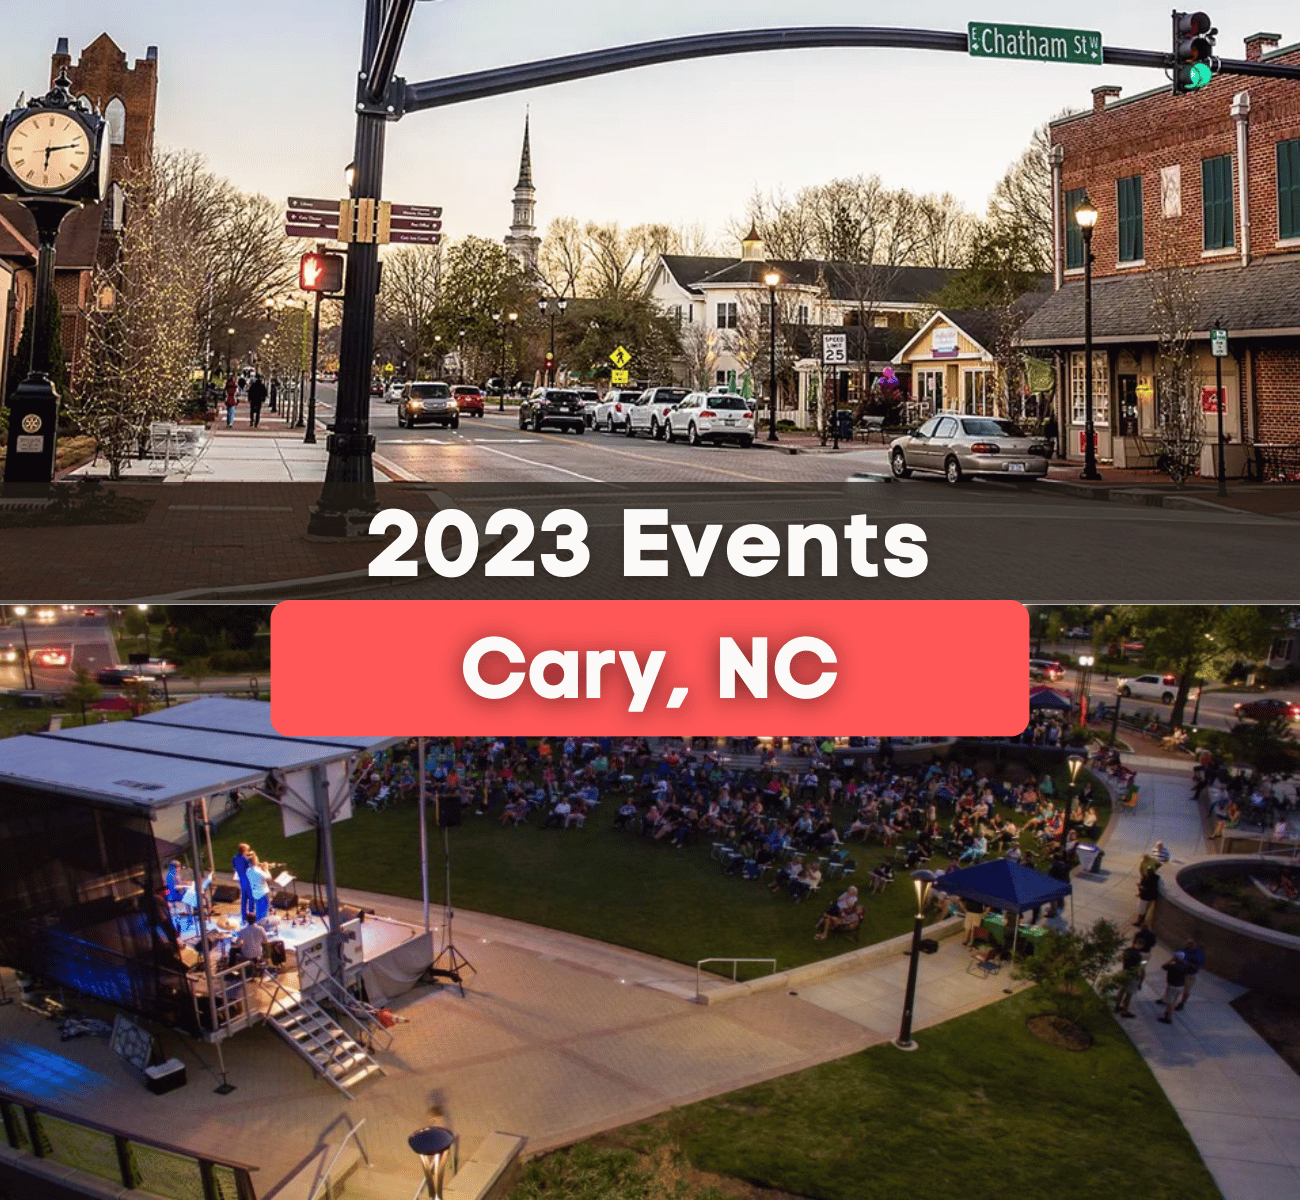 19 Fun Events In Cary, NC In 2023